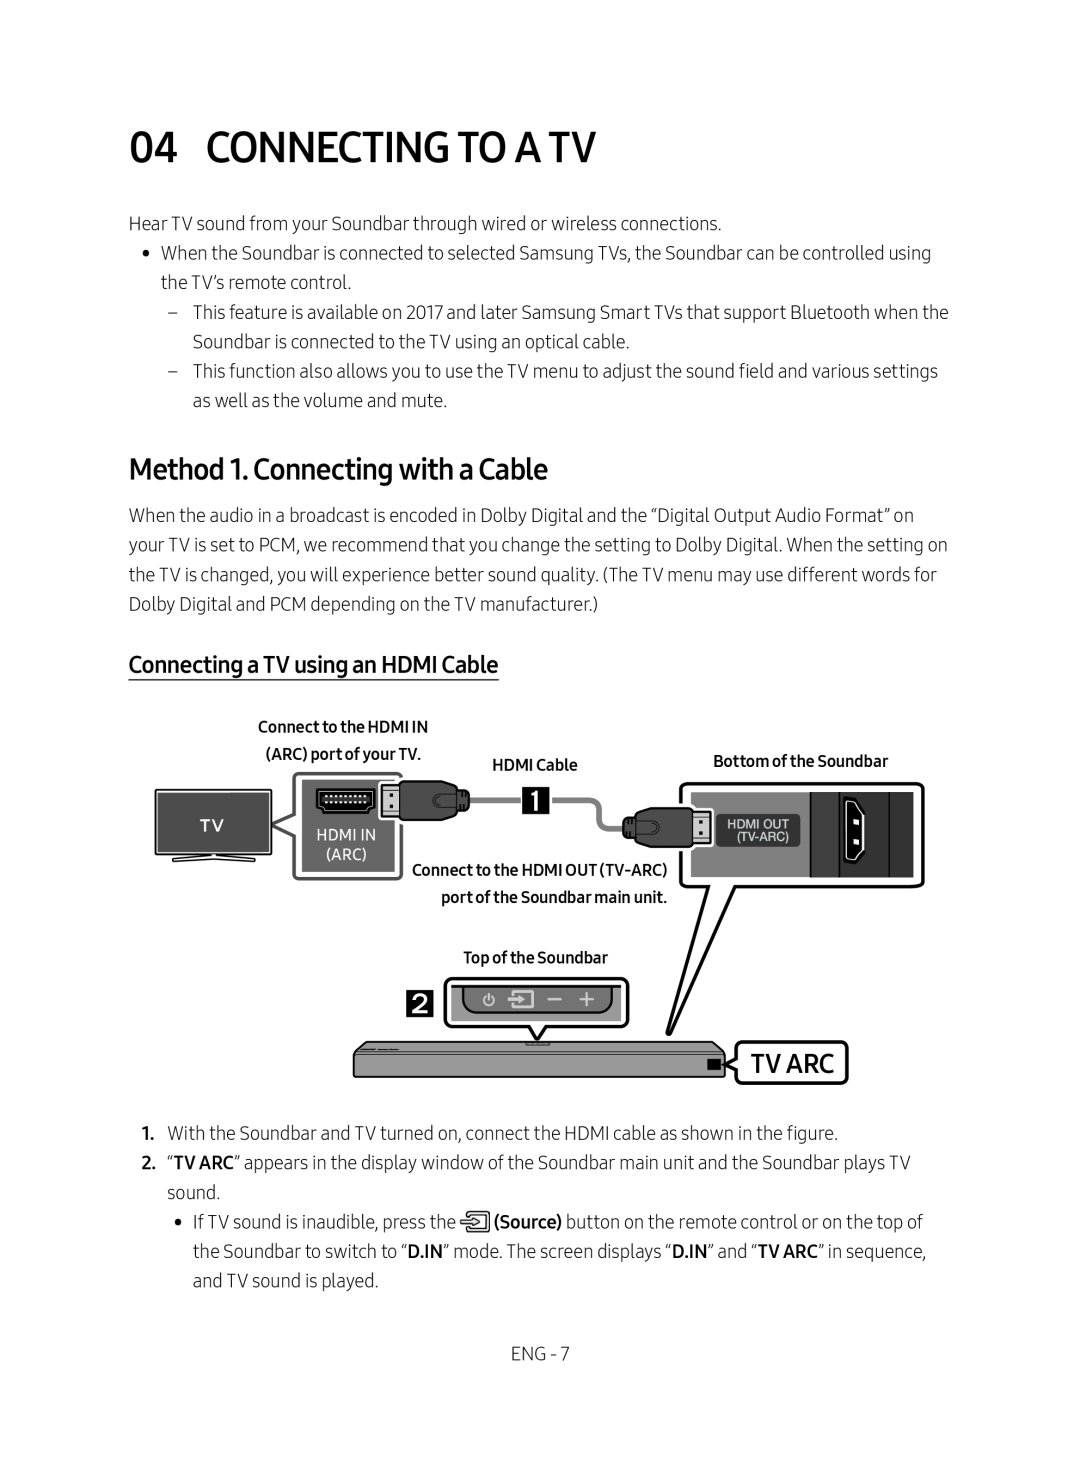 Connecting a TV using an HDMI Cable Dolby Atmos HW-N850